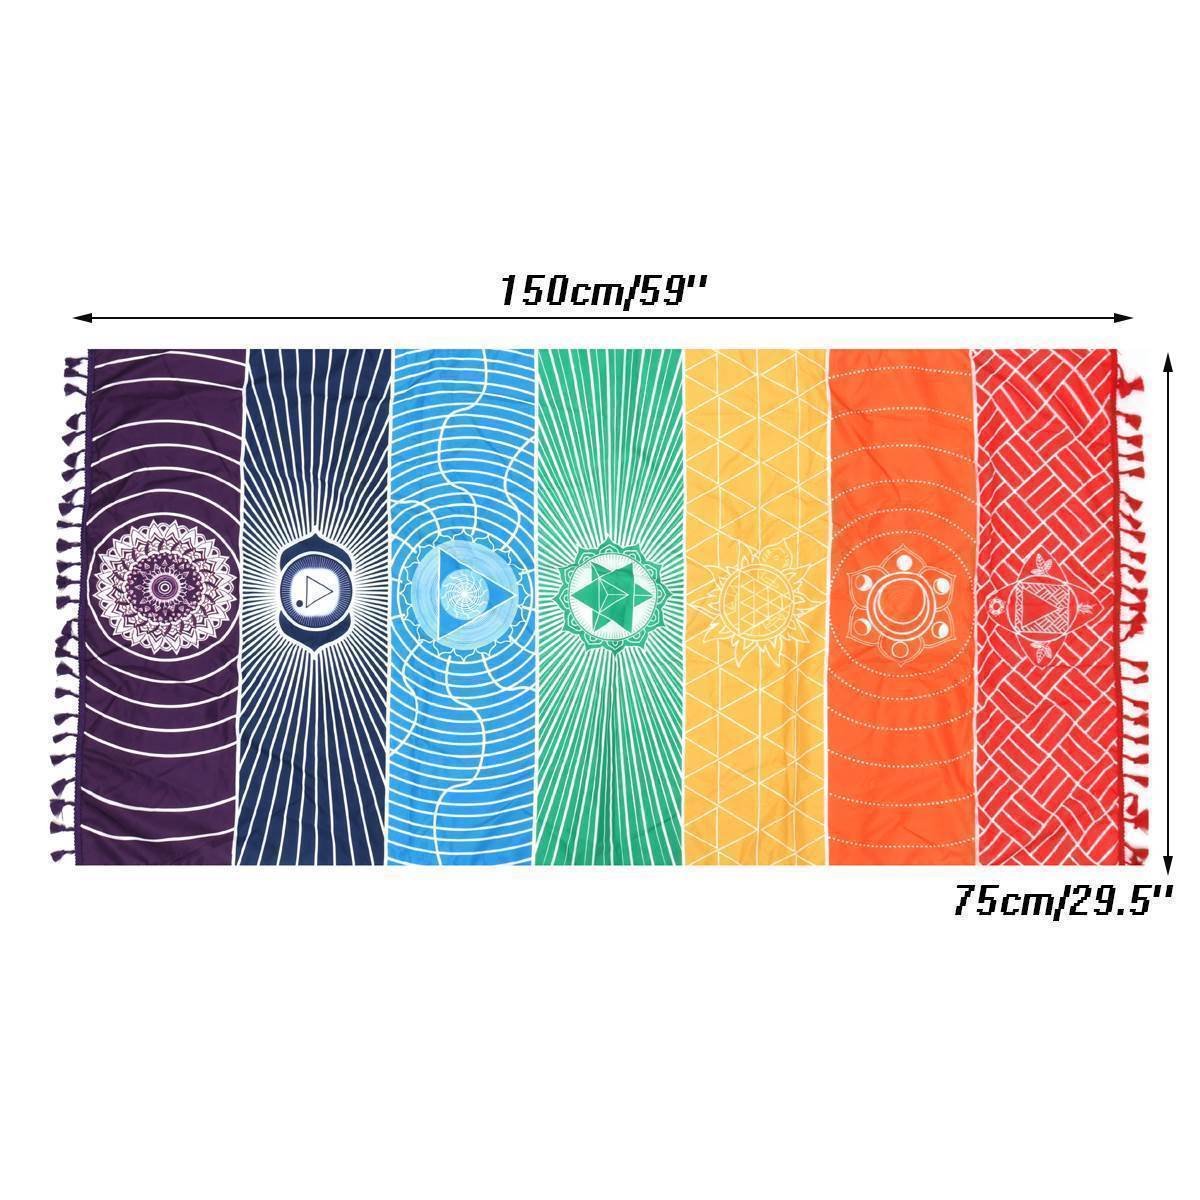 Chakra Tapestry Wall Hanger - 12.5 wide x 51 inch long - 32.5